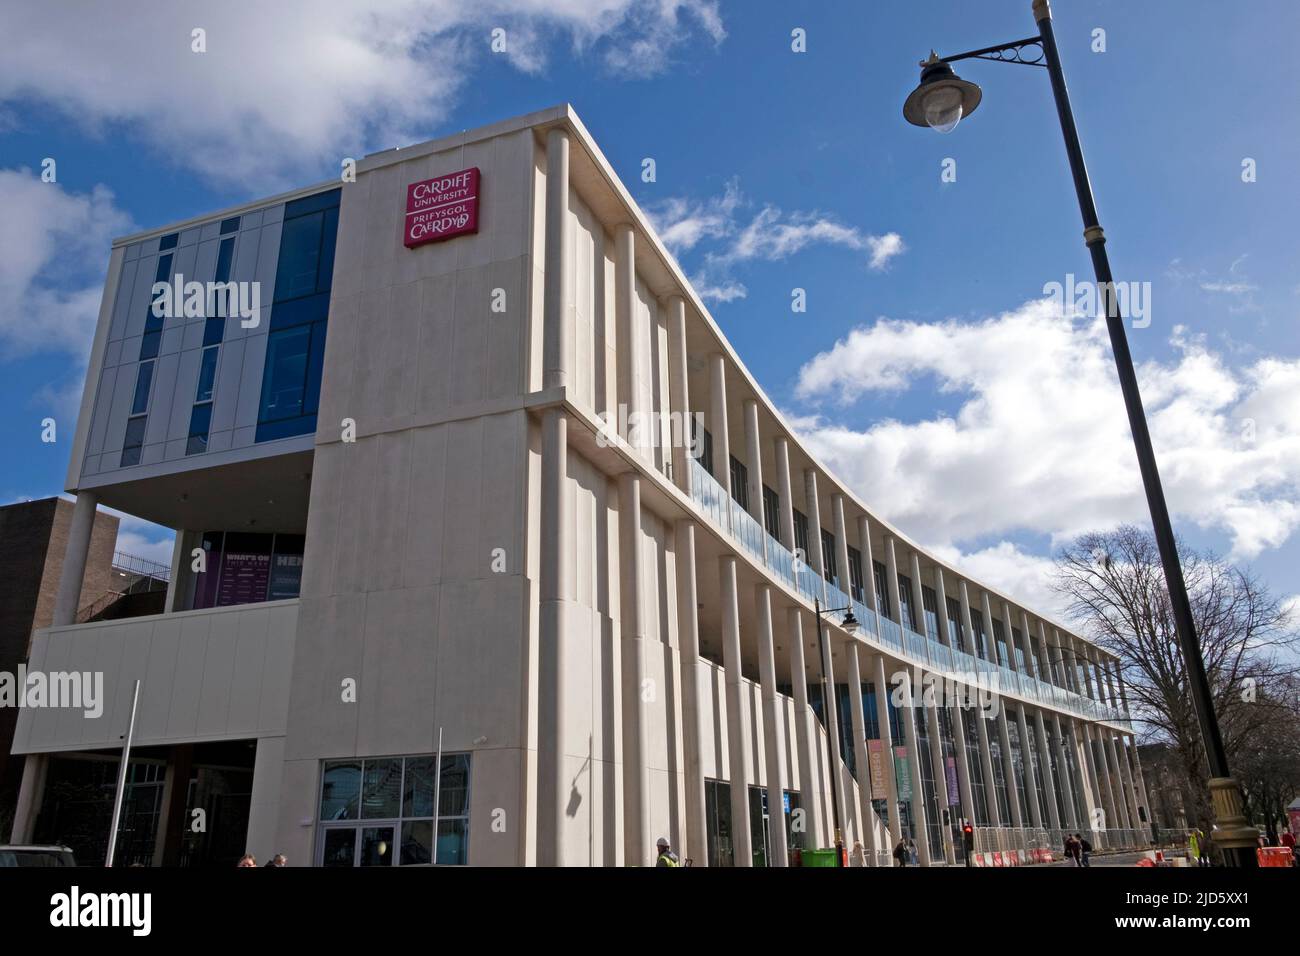 Exterior view of new Centre for Student Life building at Cardiff University Wales UK   KATHY DEWITT Stock Photo